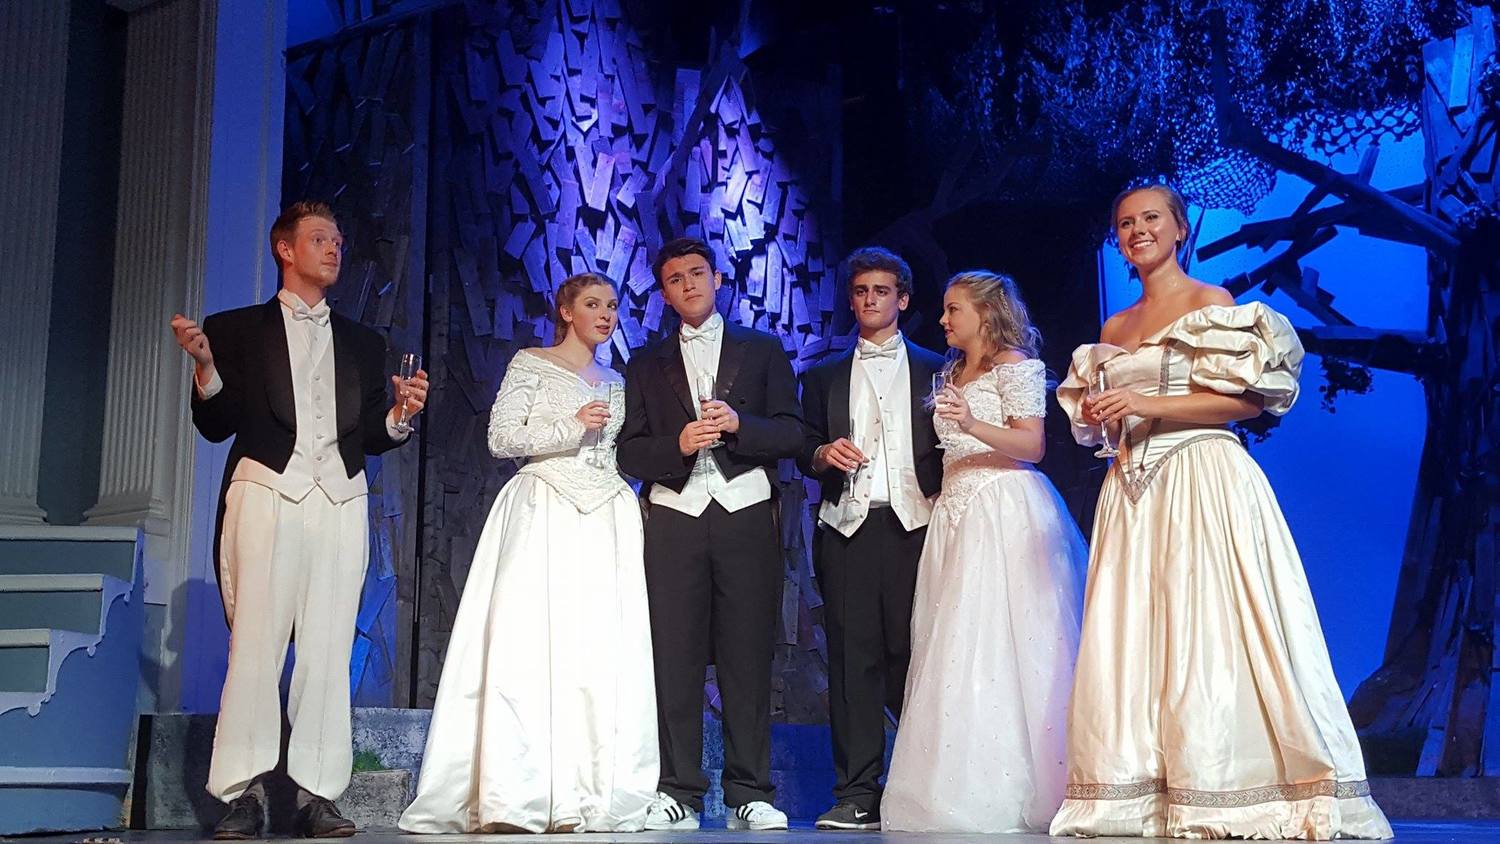 Te lovers (Rebecca Madiera as Helena, John Gnazzo as Demetrius, Claudia Noto as Hermia, and Ben Beckman as Lysander) make it out of the enchanted woods to join Oberon and Titania (Chris Lorenc and Elizabeth O Brien) in celebrating their long-awaited nuptial hours in 